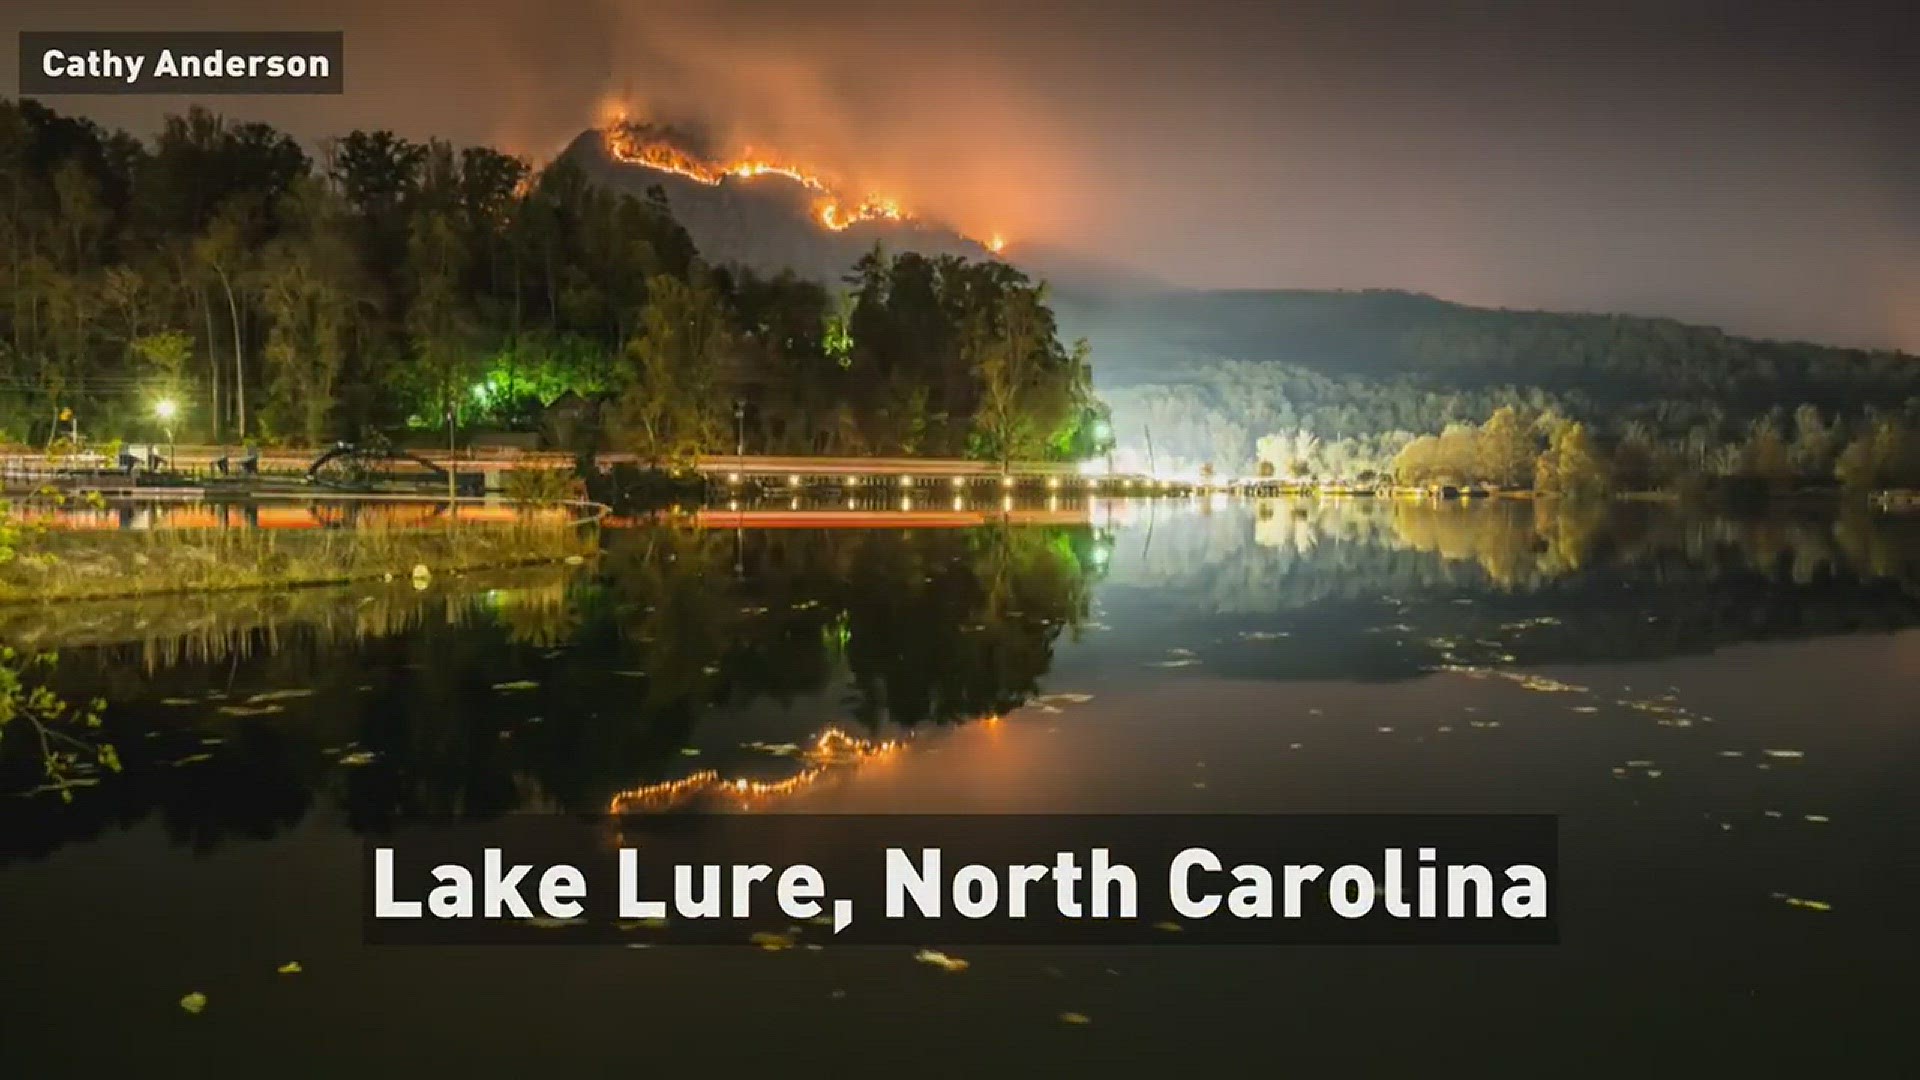 Photographer Cathy Anderson captured the wildfires near Lake Lure in a time-lapse YouTube video she released on Sunday.